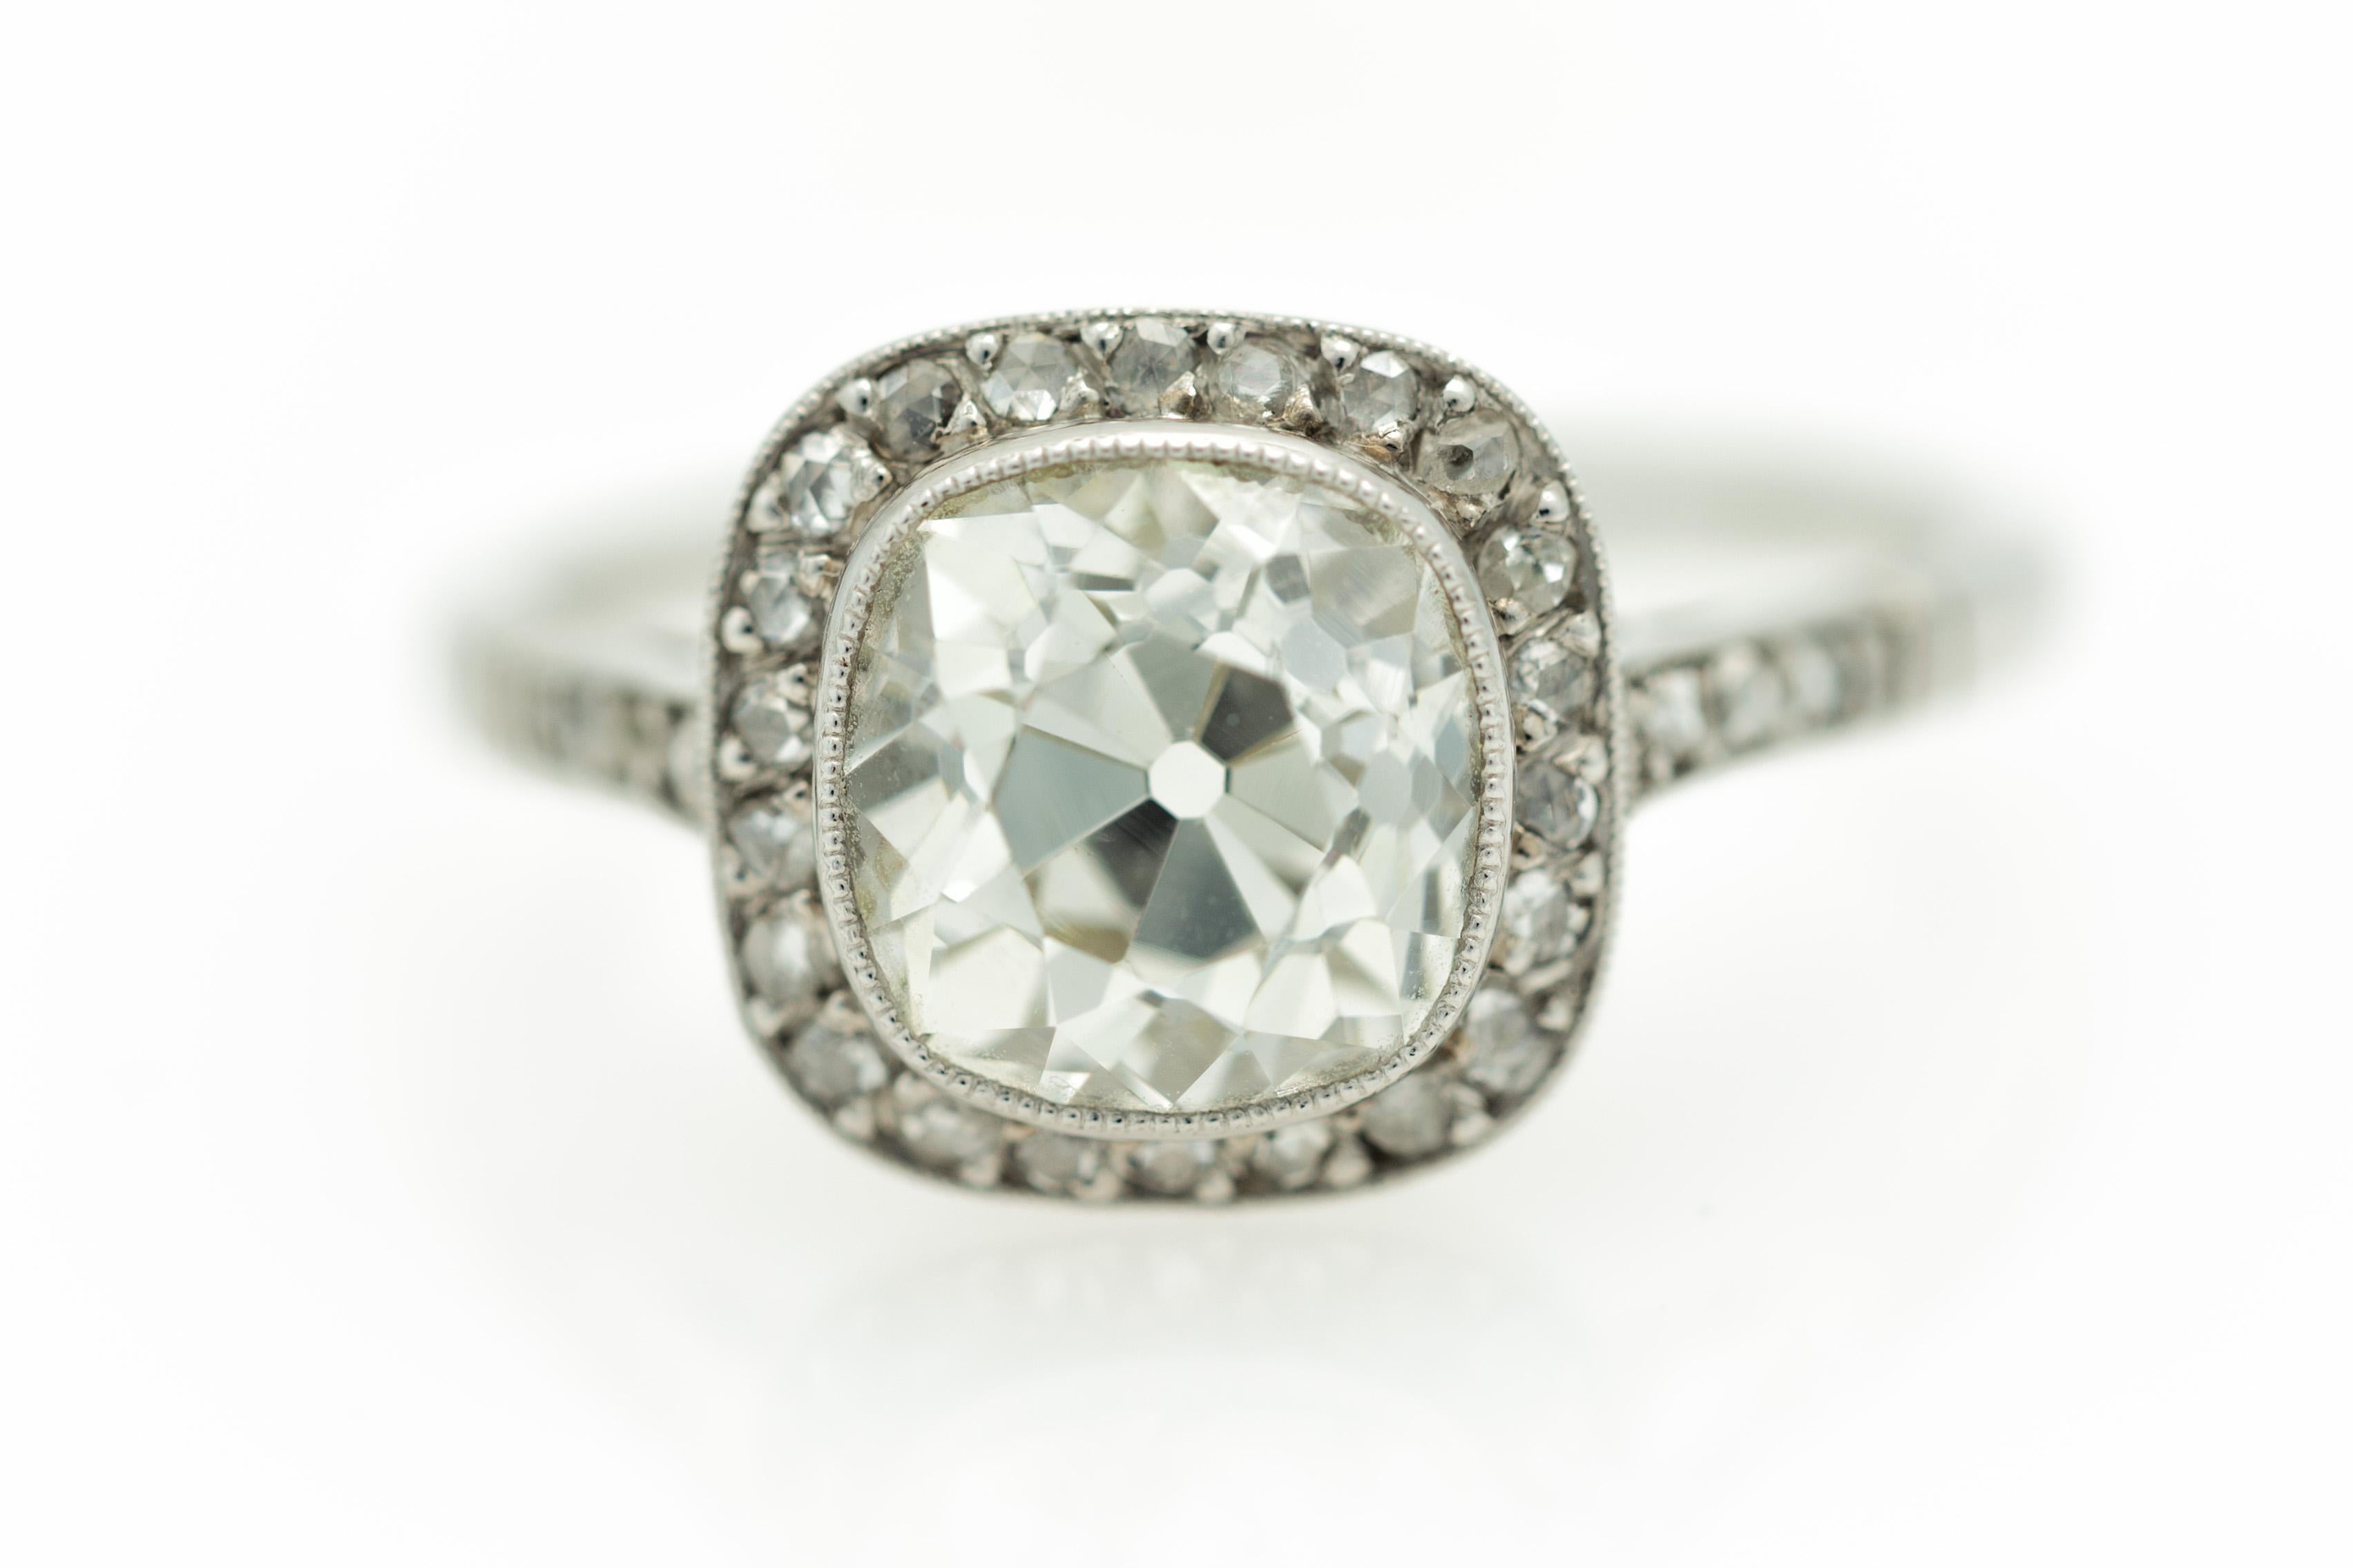 An Italian Art Deco Revival diamond halo engagement ring with a 2.64 carat solitaire Diamond in its center set in platinum size 7 ¼, circa 1950. Handmade in Italy during the midcentury period, this Art Deco halo ring features a 2.64 carat cushion